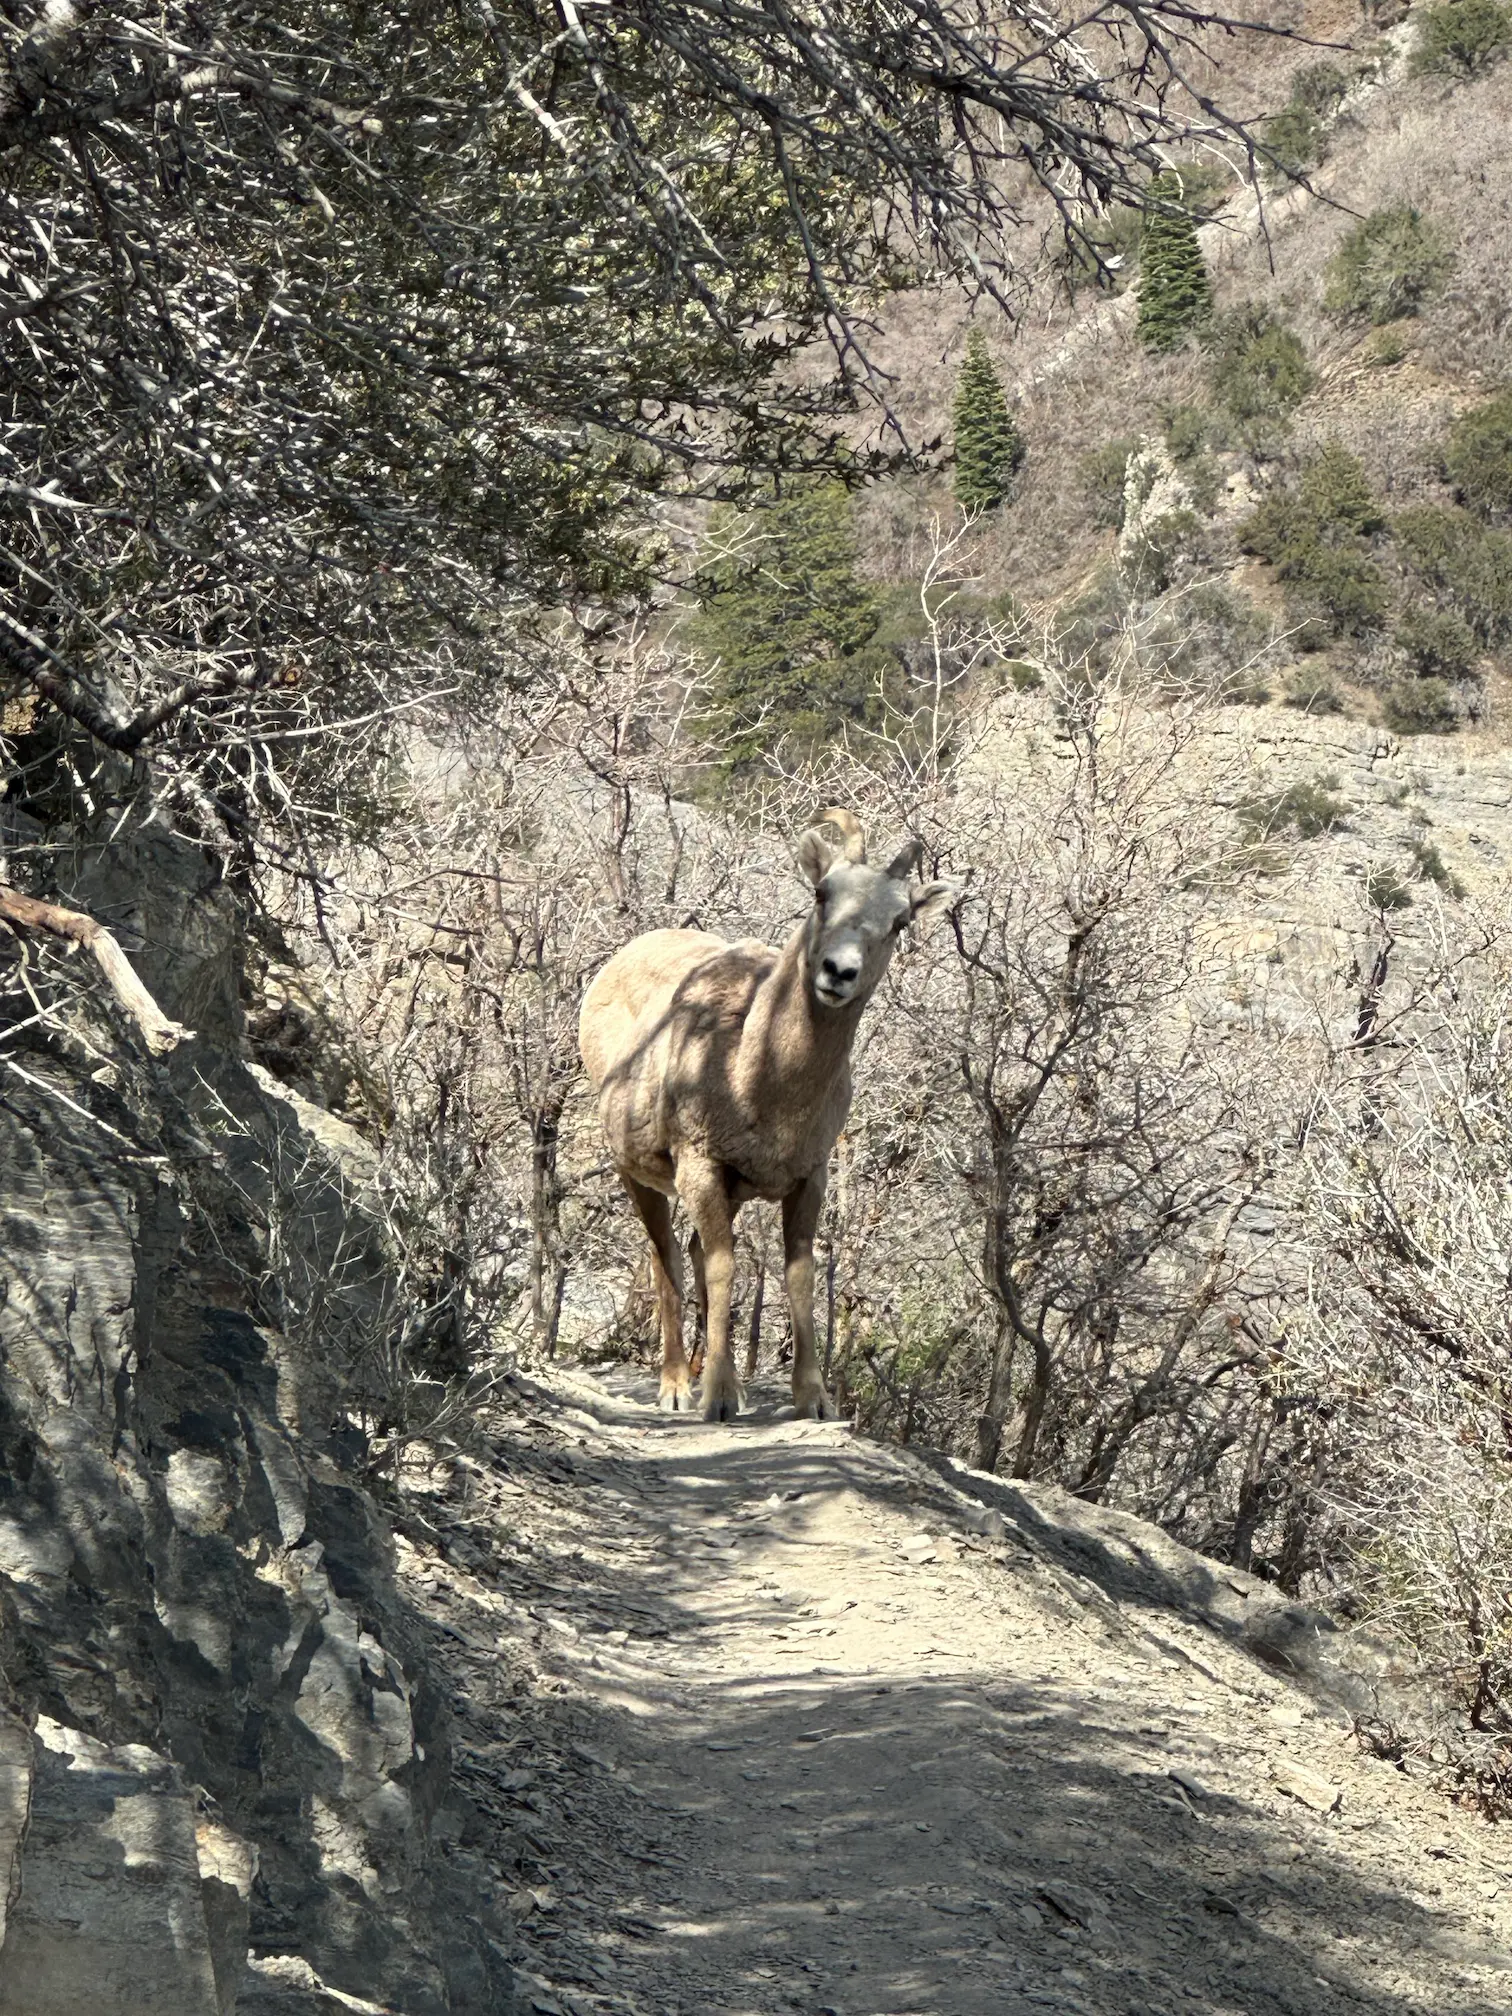 A stubborn mountain goat is blocking the trail. 🐐